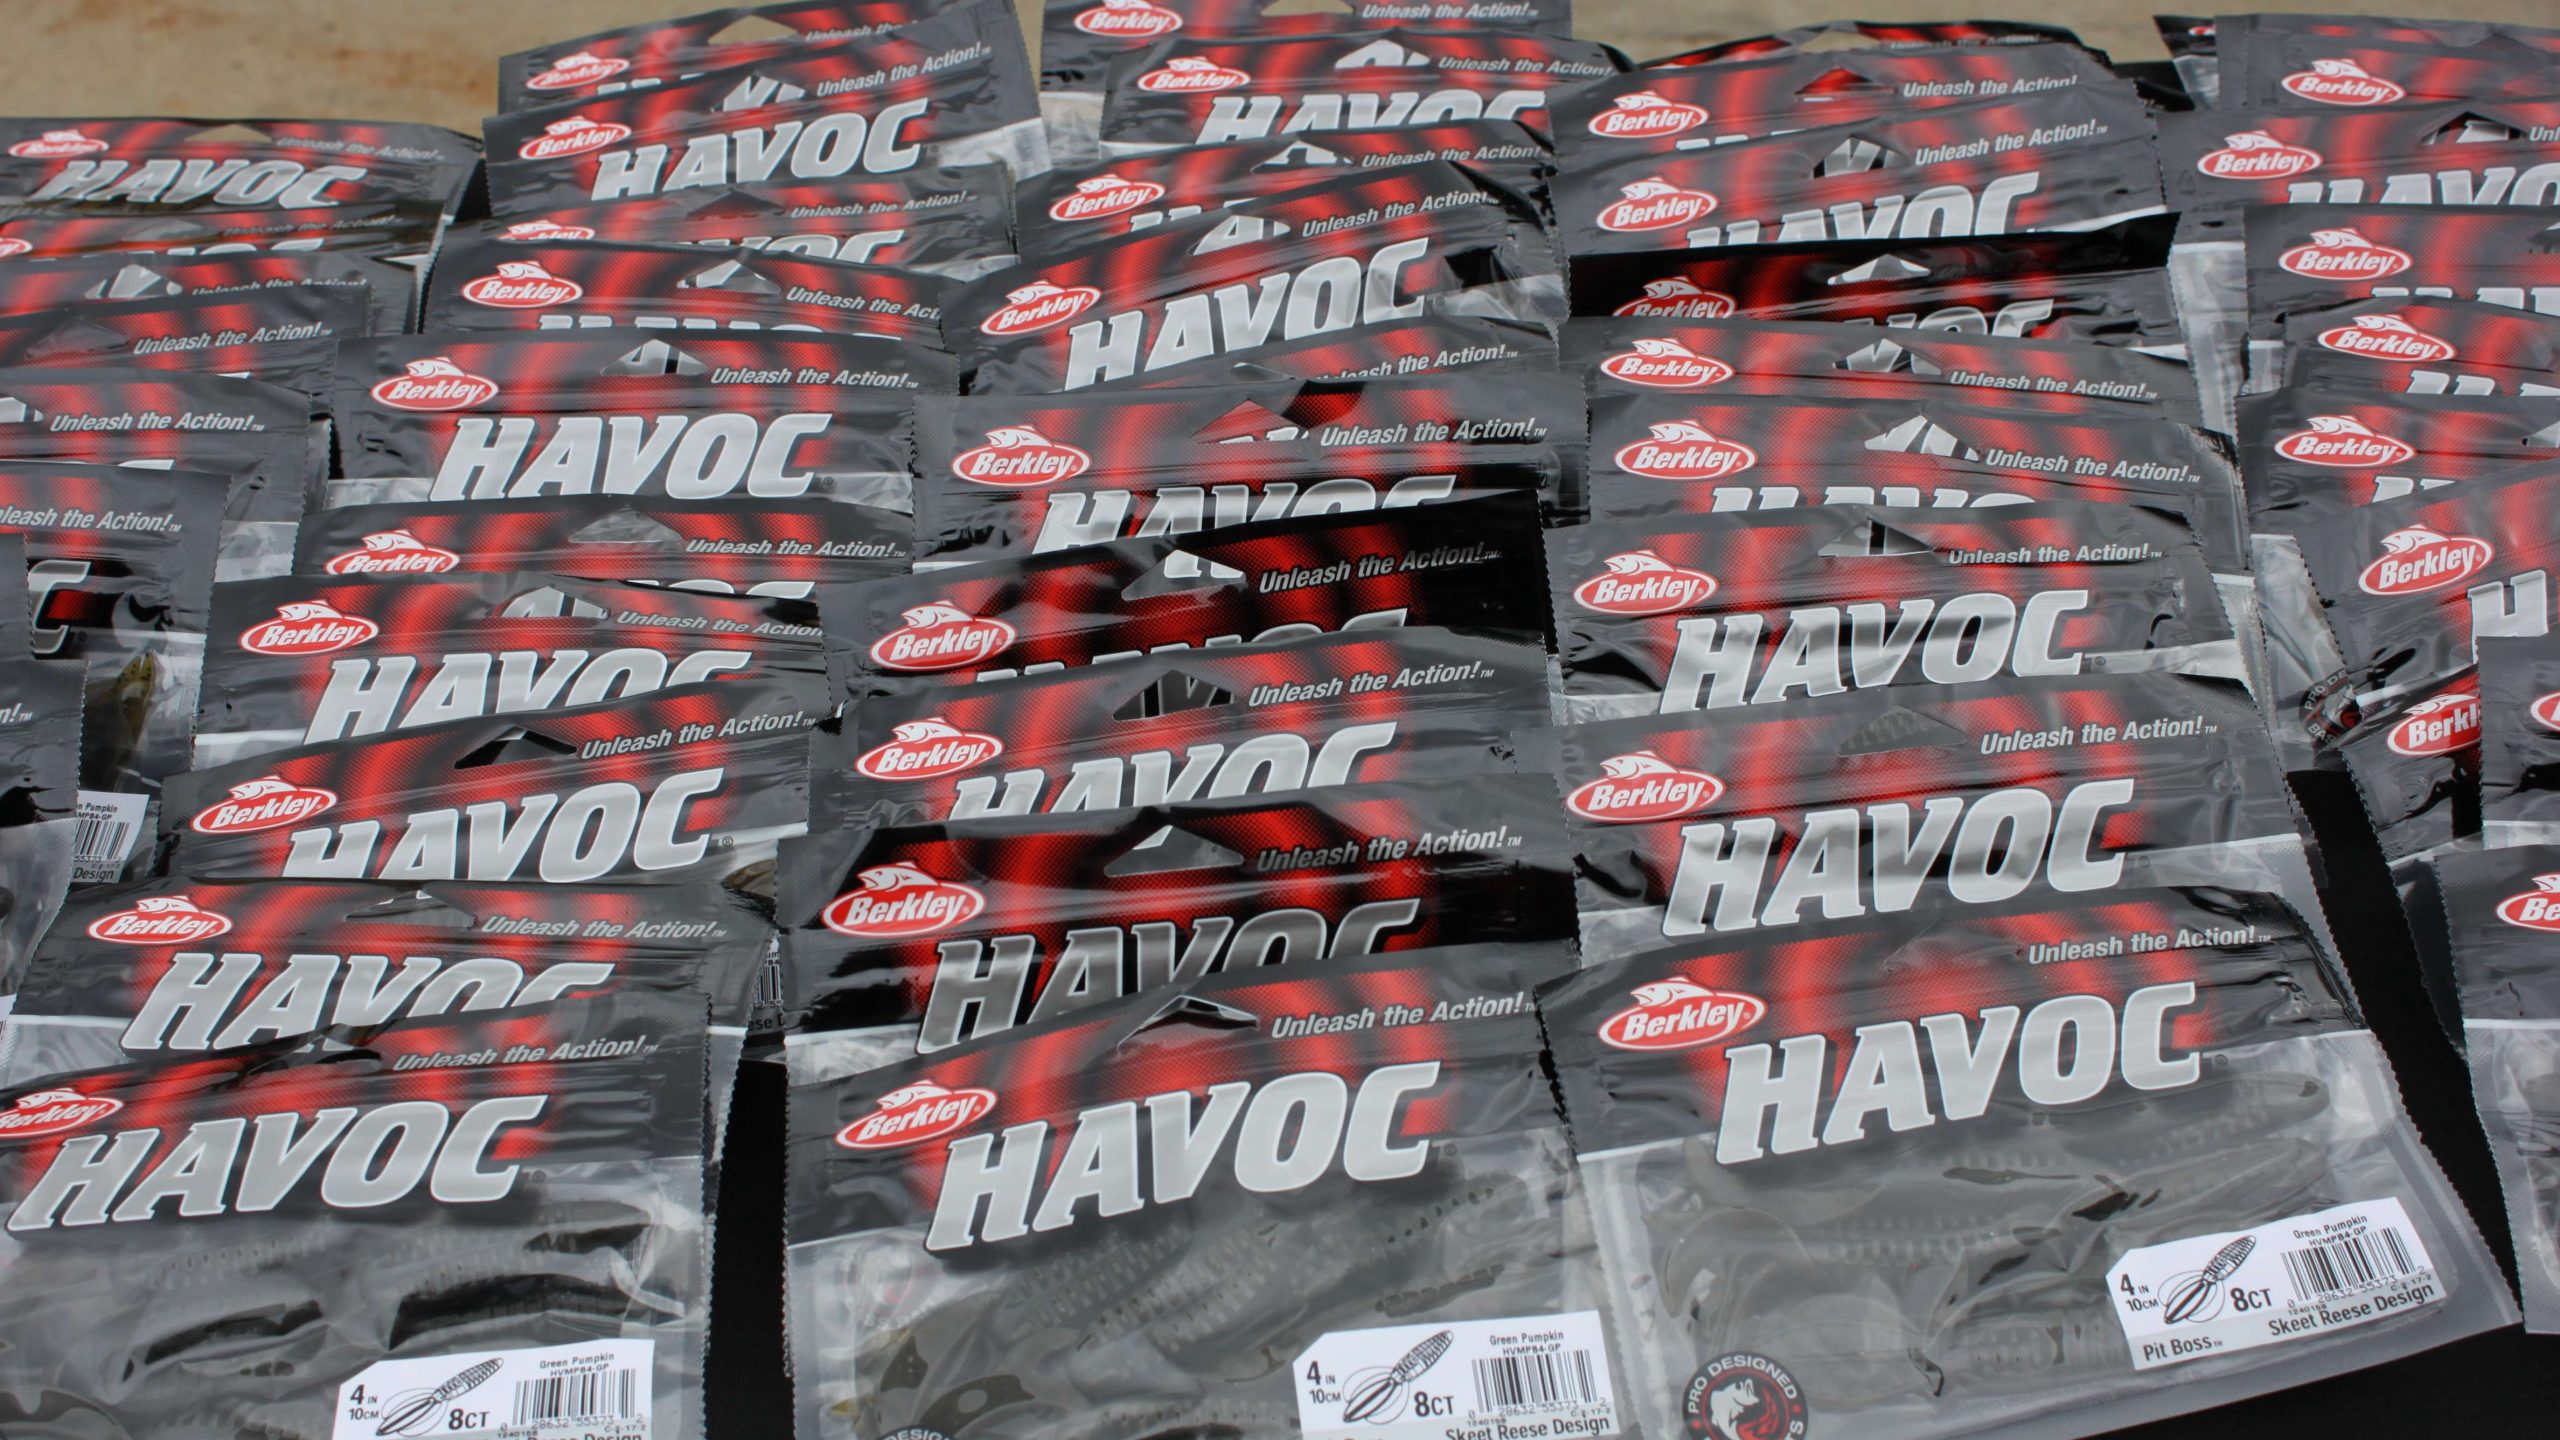  Berkley Havoc lures were among the loot given away at the
Central Open registration.